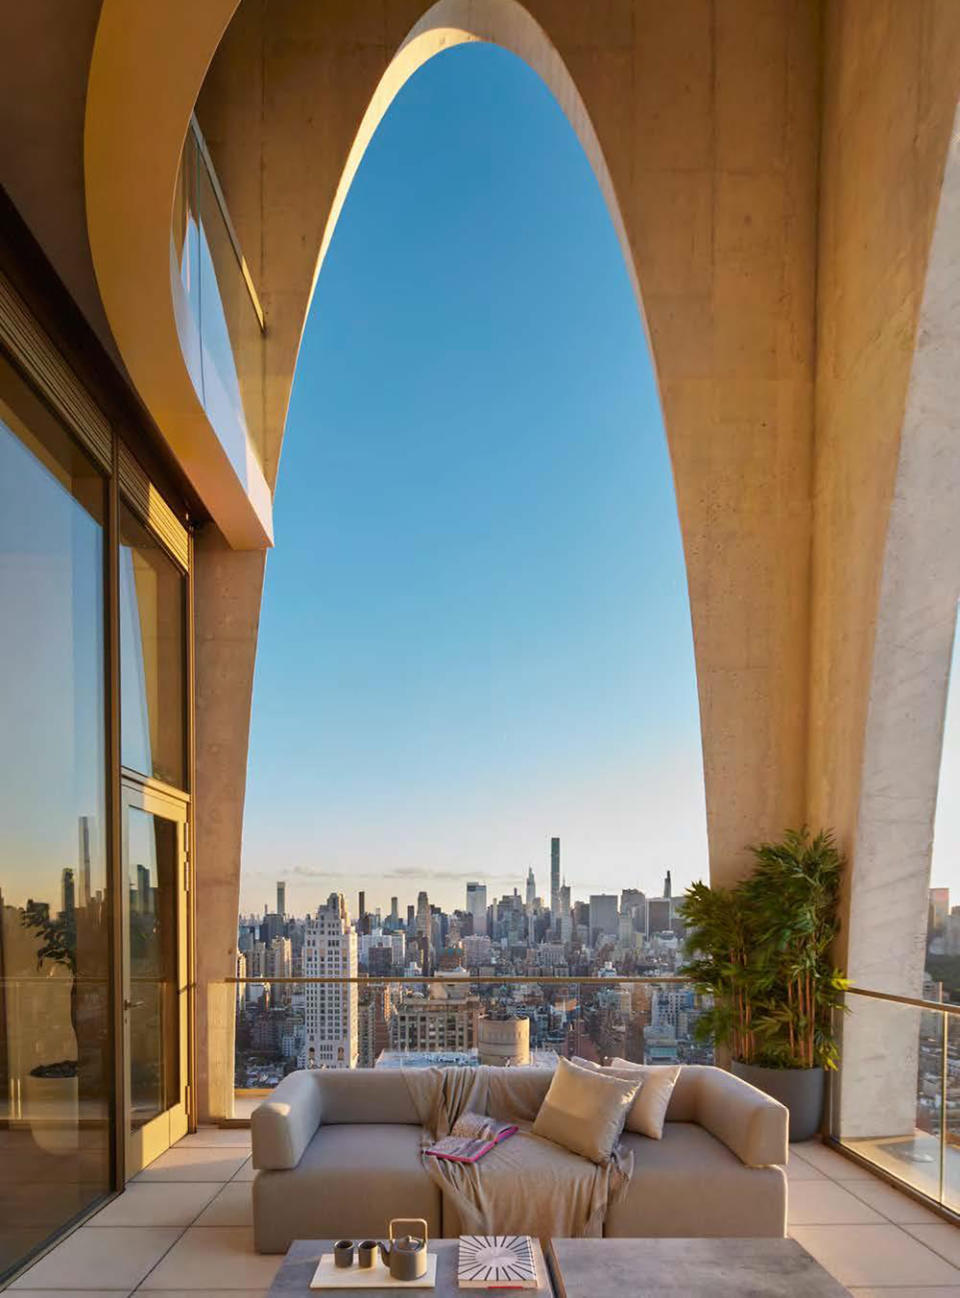 The Penthouse at 180 East 88th Street